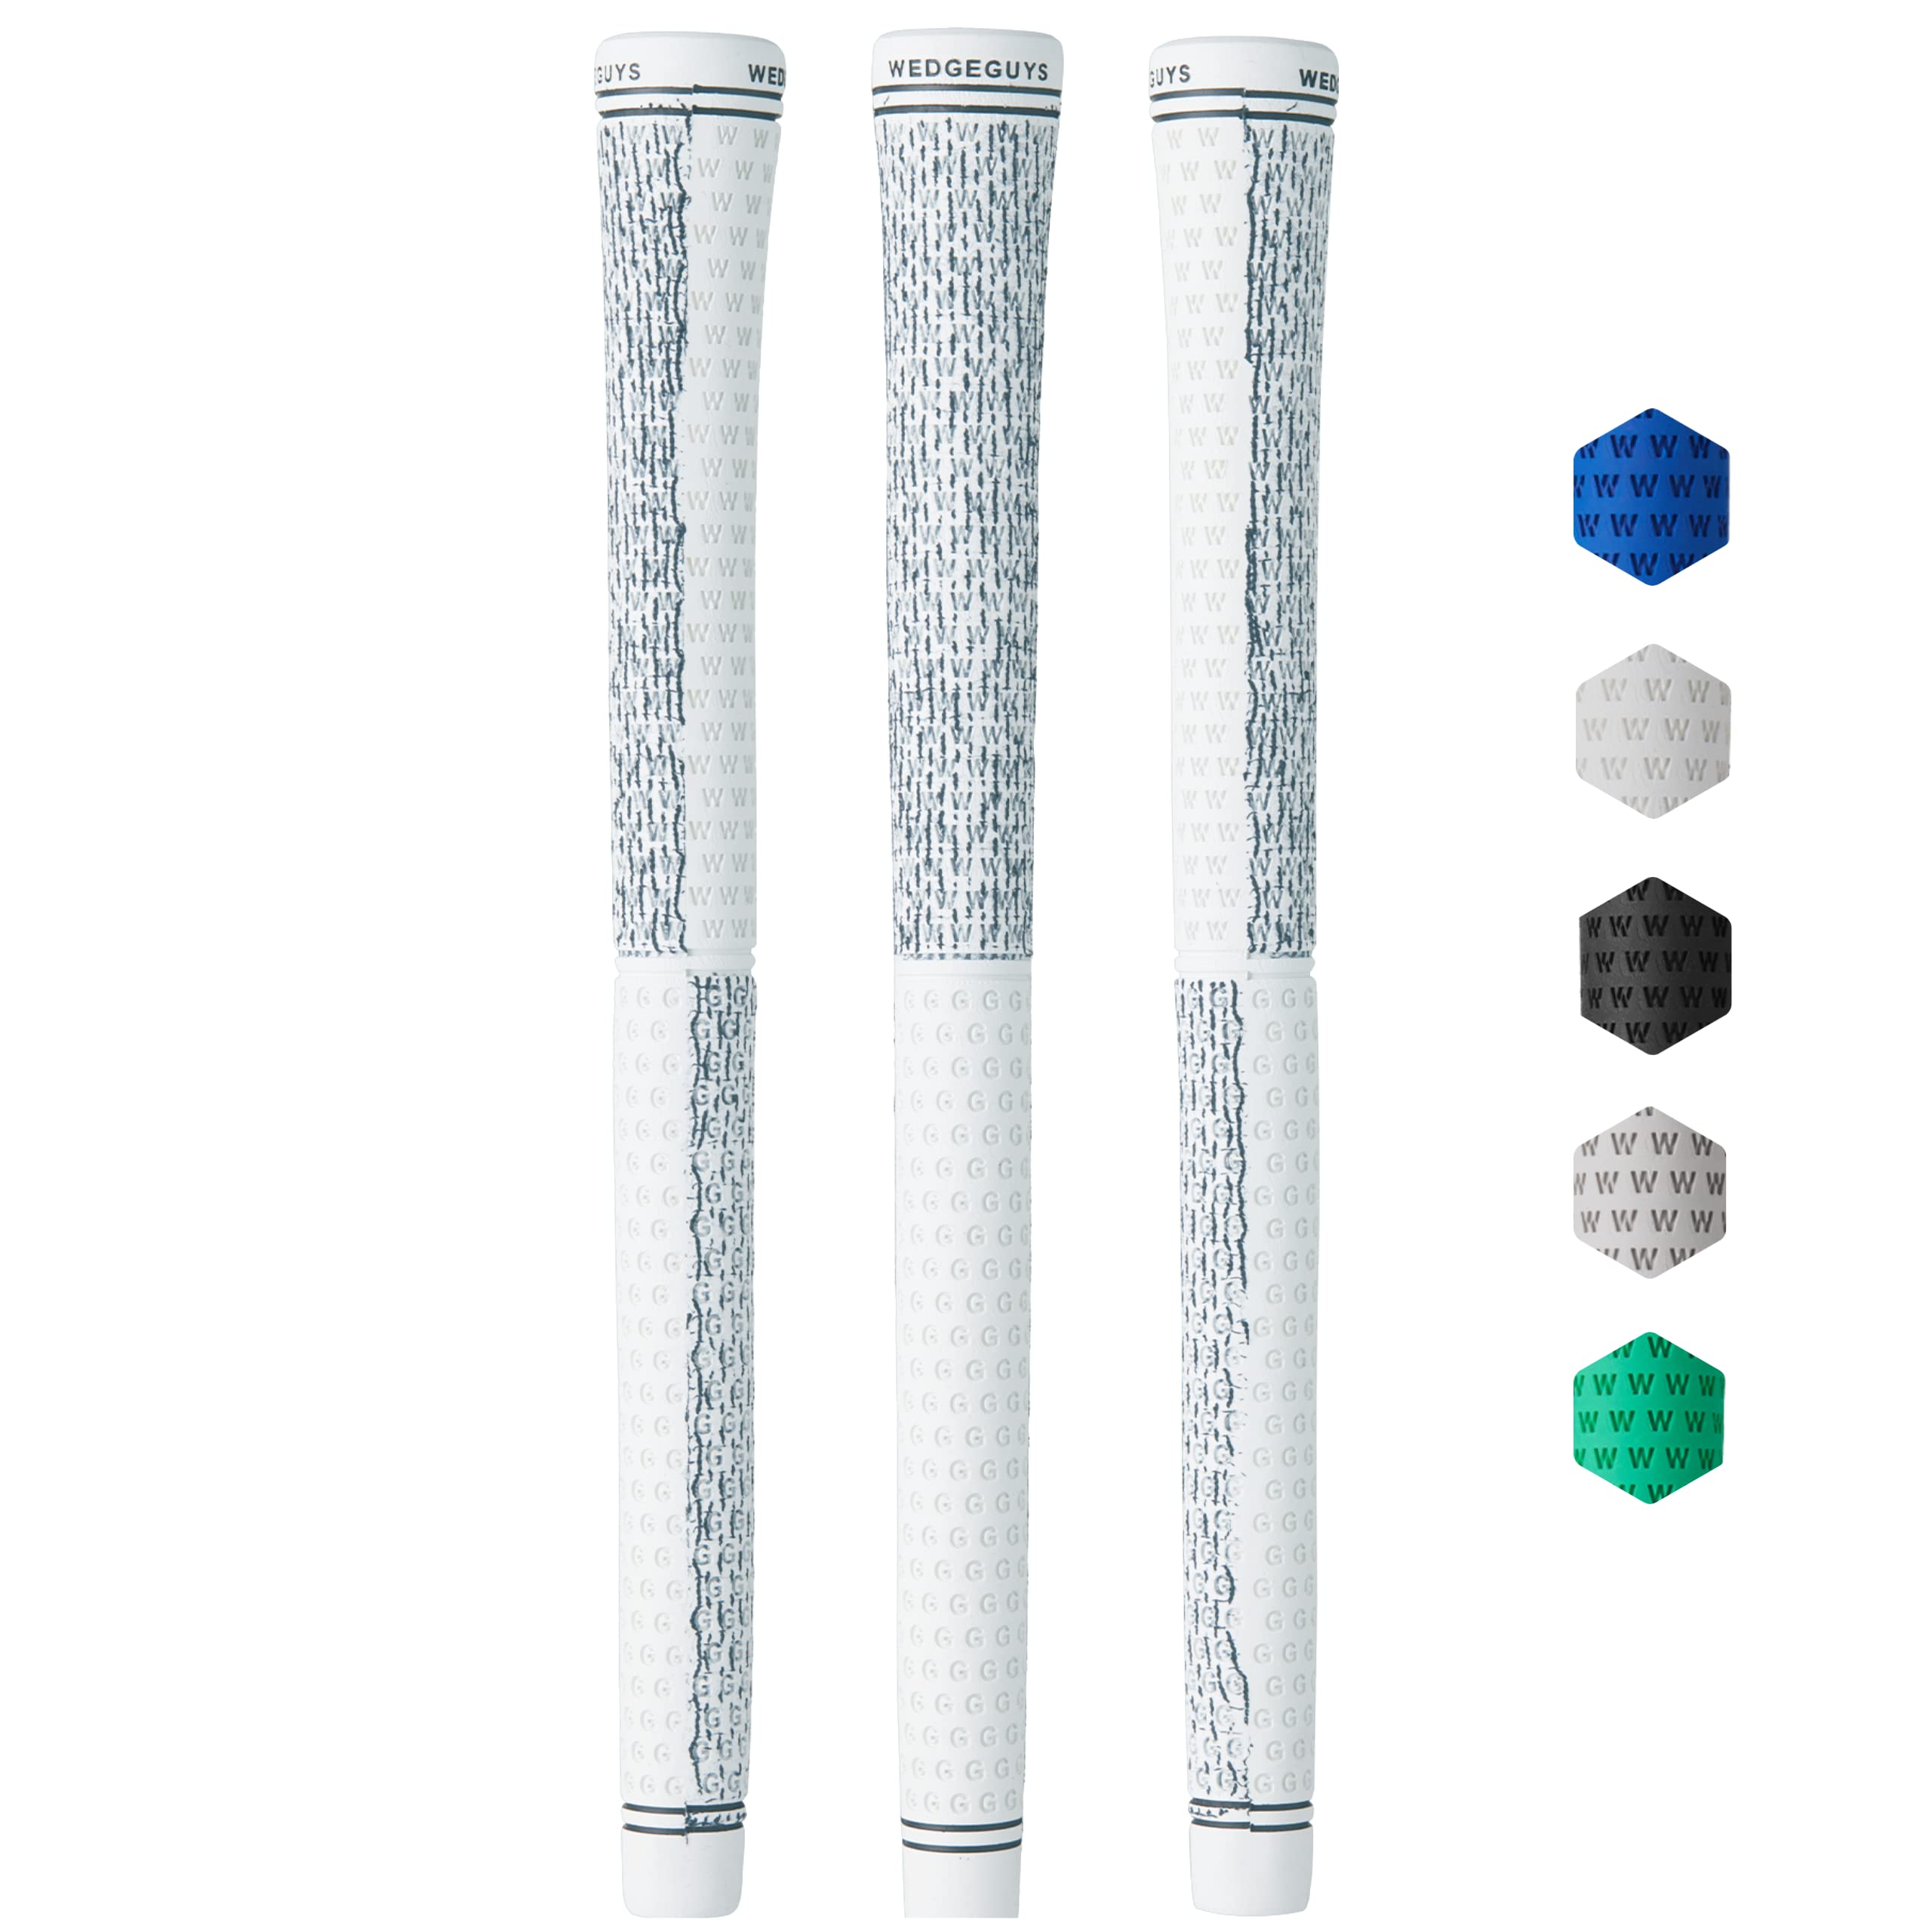 Wedge Guys DC Tour Golf Grips 4 Grip Zones for Supreme Comfort & Control -  All-Weather Performance Golf Club Grips Replacement for Regripping Wedges  Drivers Irons Woods Hybrids, Midsize or Standard Midsize